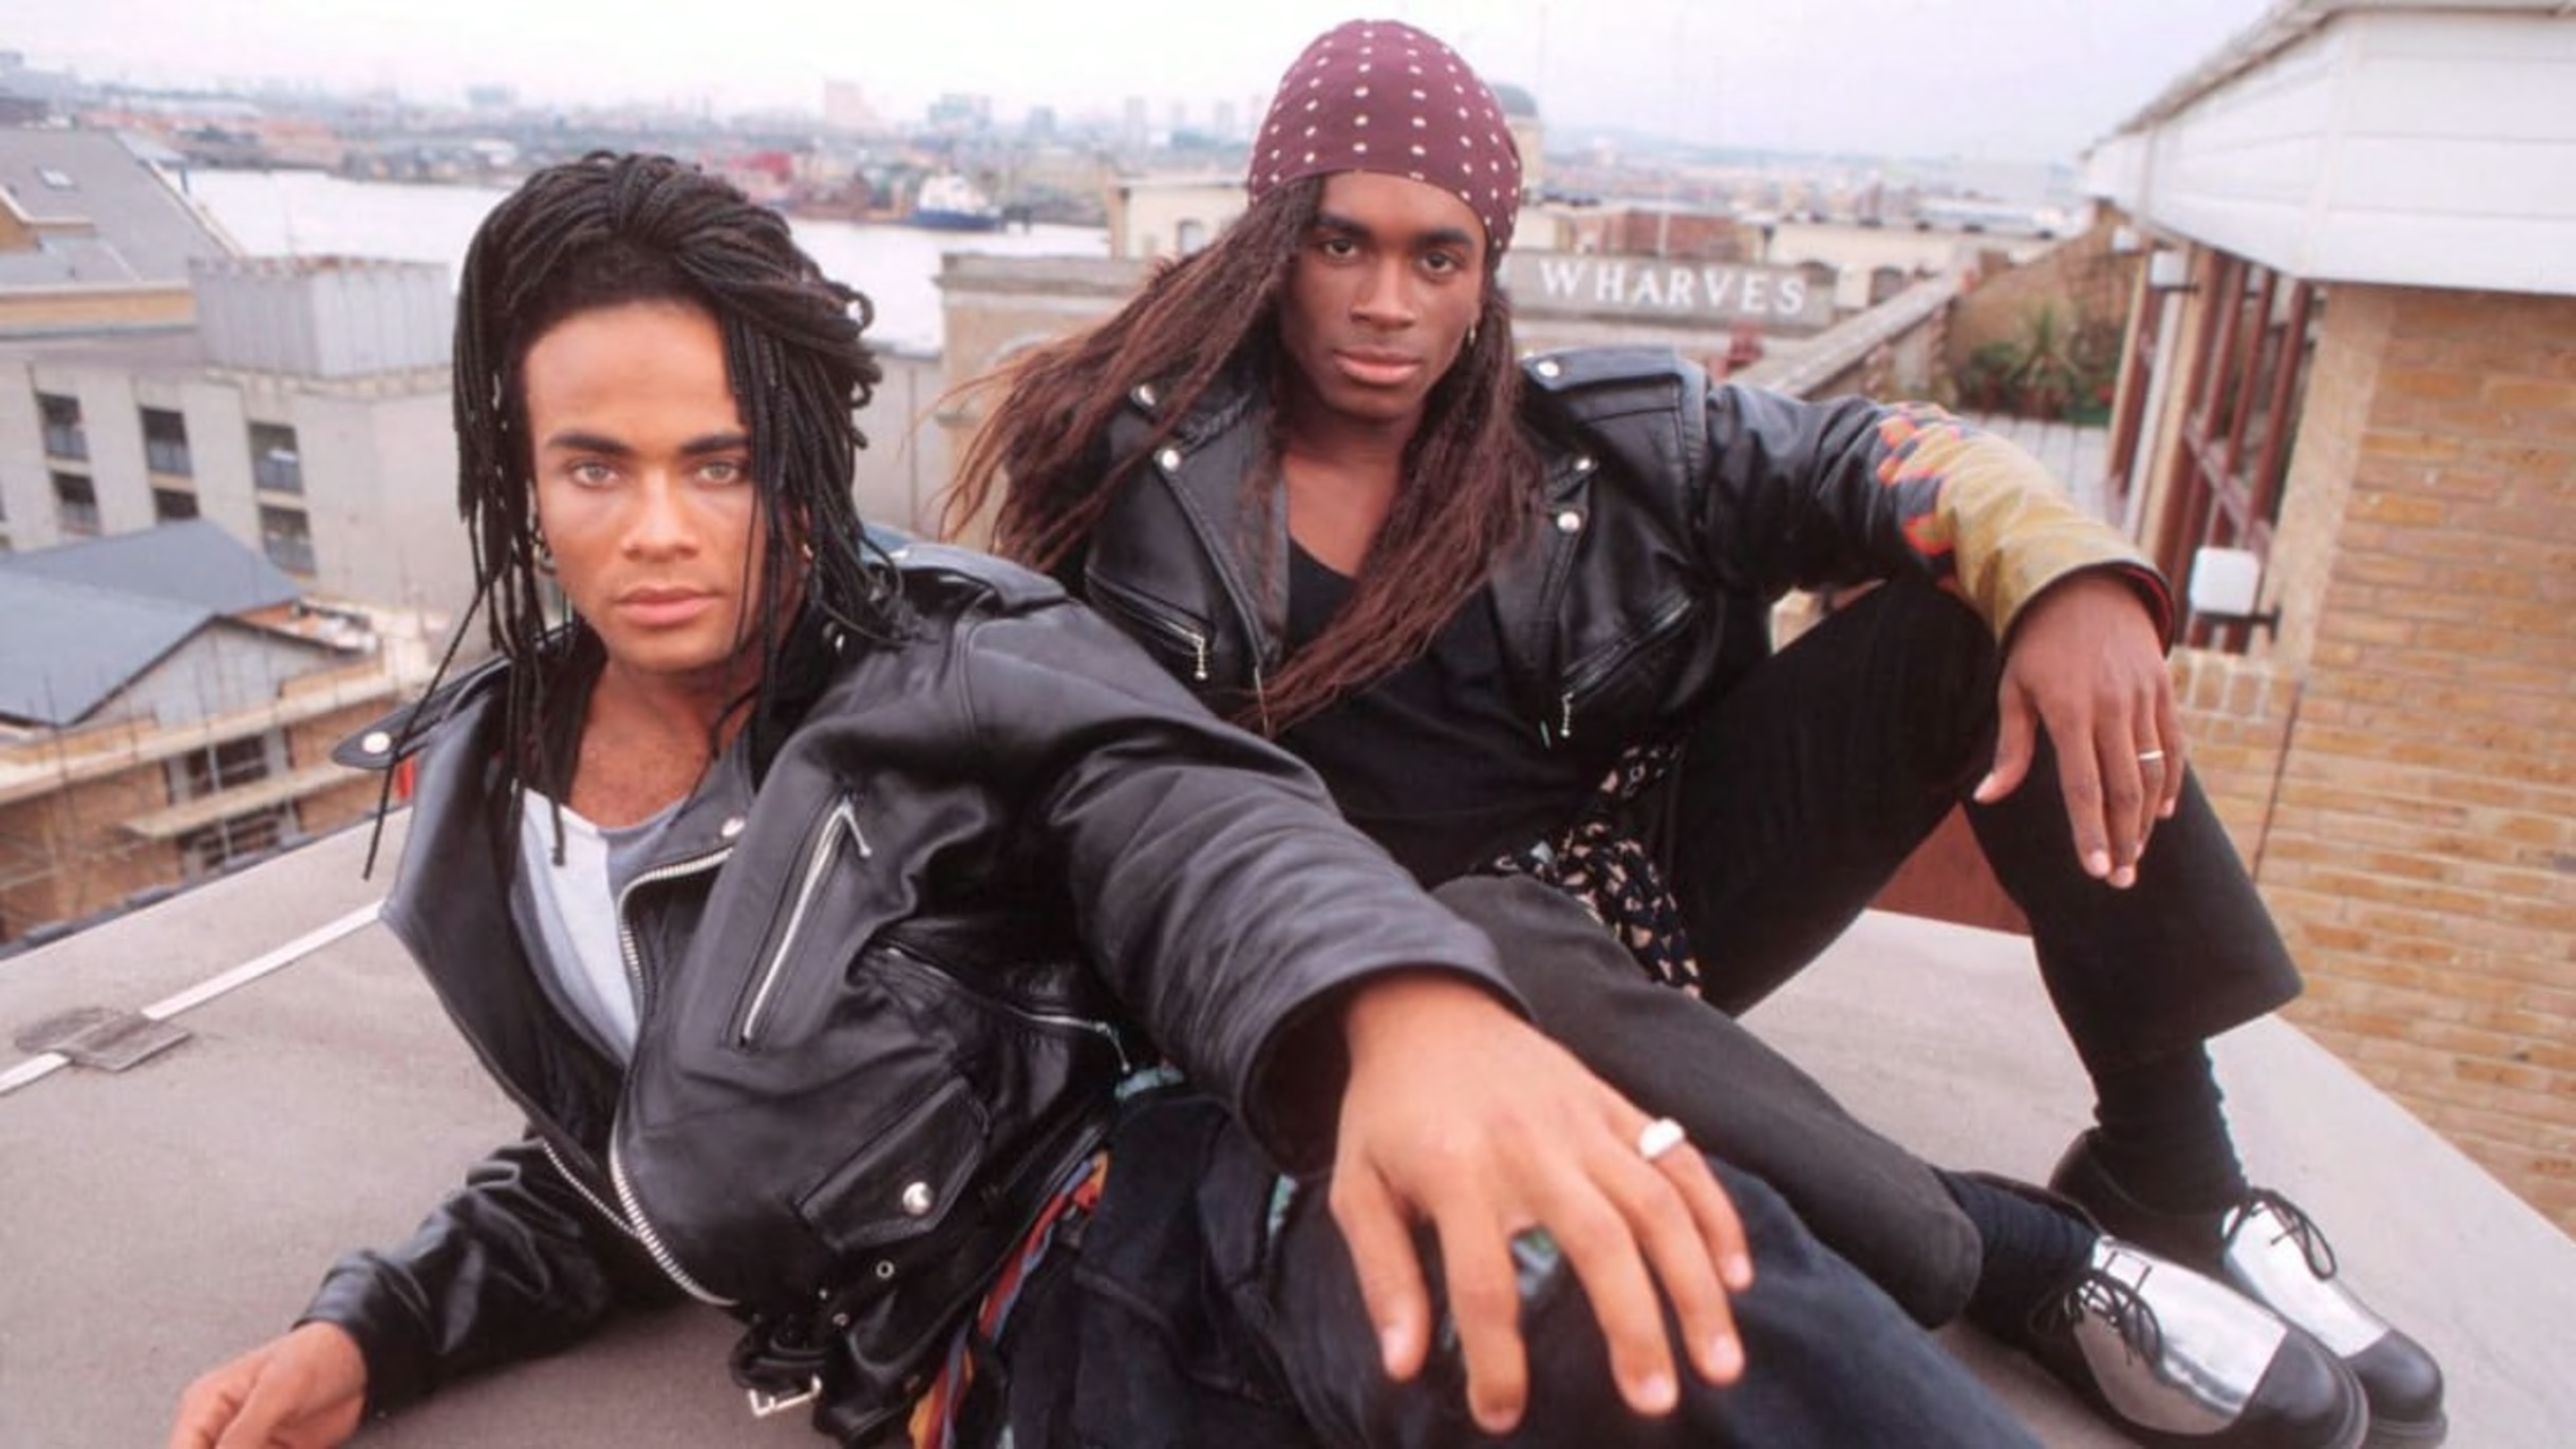 30 Years Later: The Great Milli Vanilli Hoax